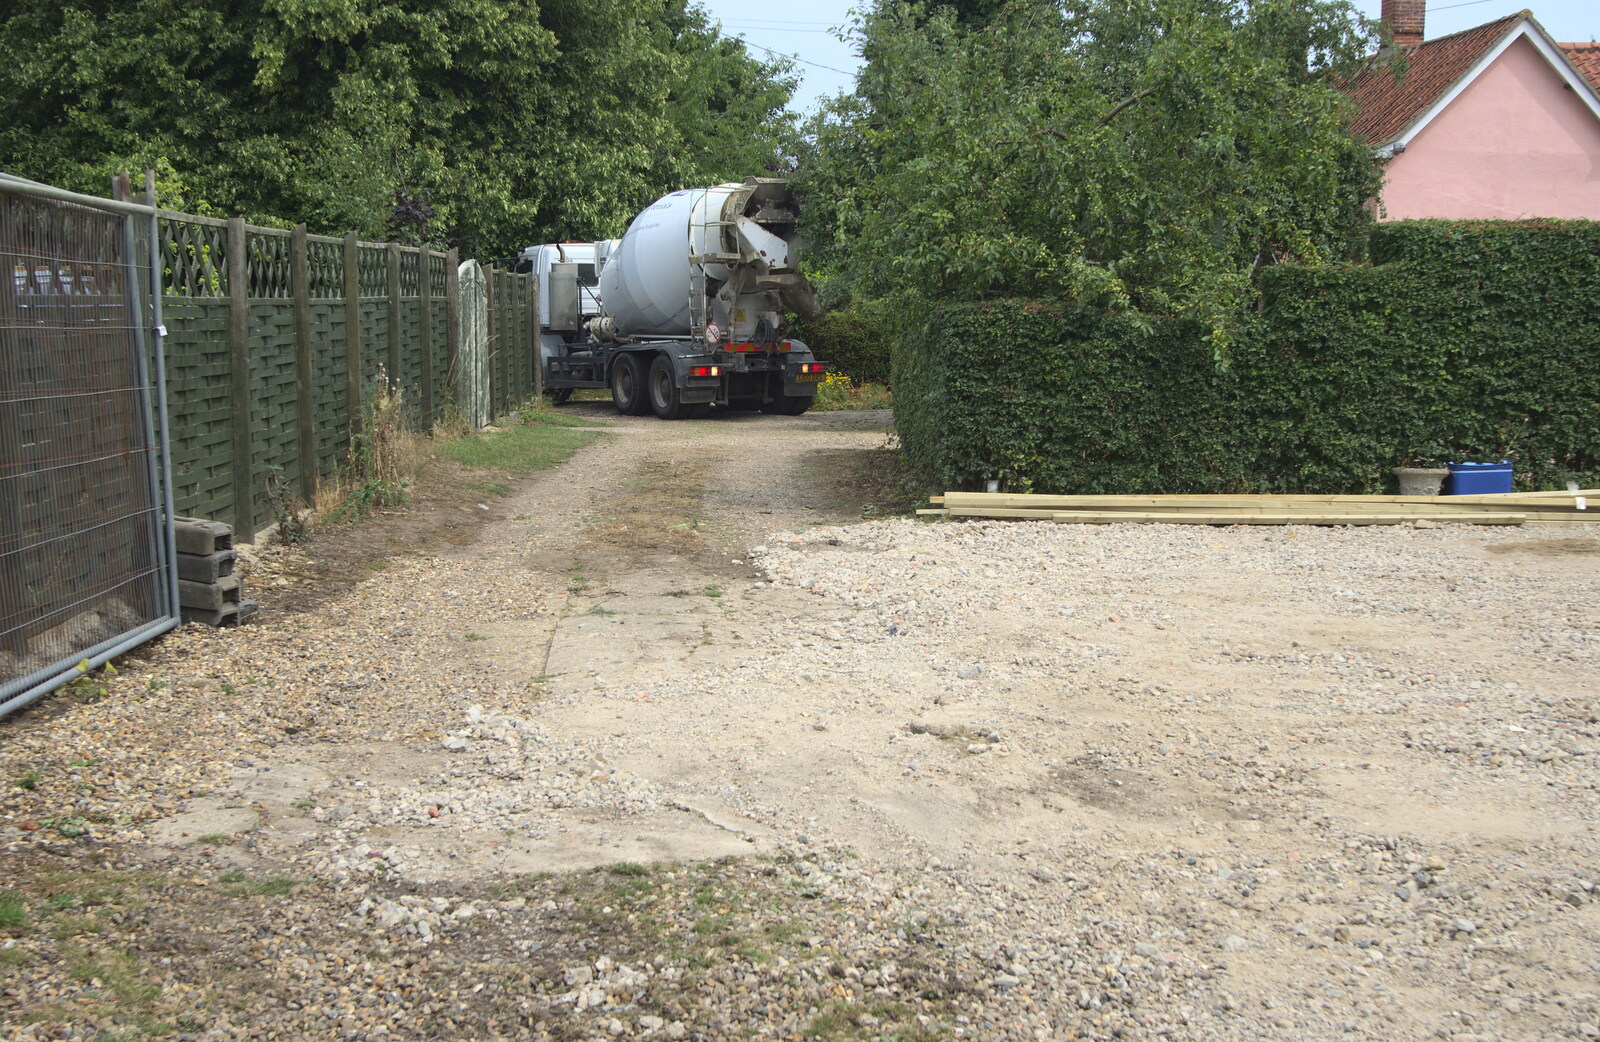 The first load of concrete arrives from Grand Designs: Building Commences, Brome, Suffolk - 8th August 2013